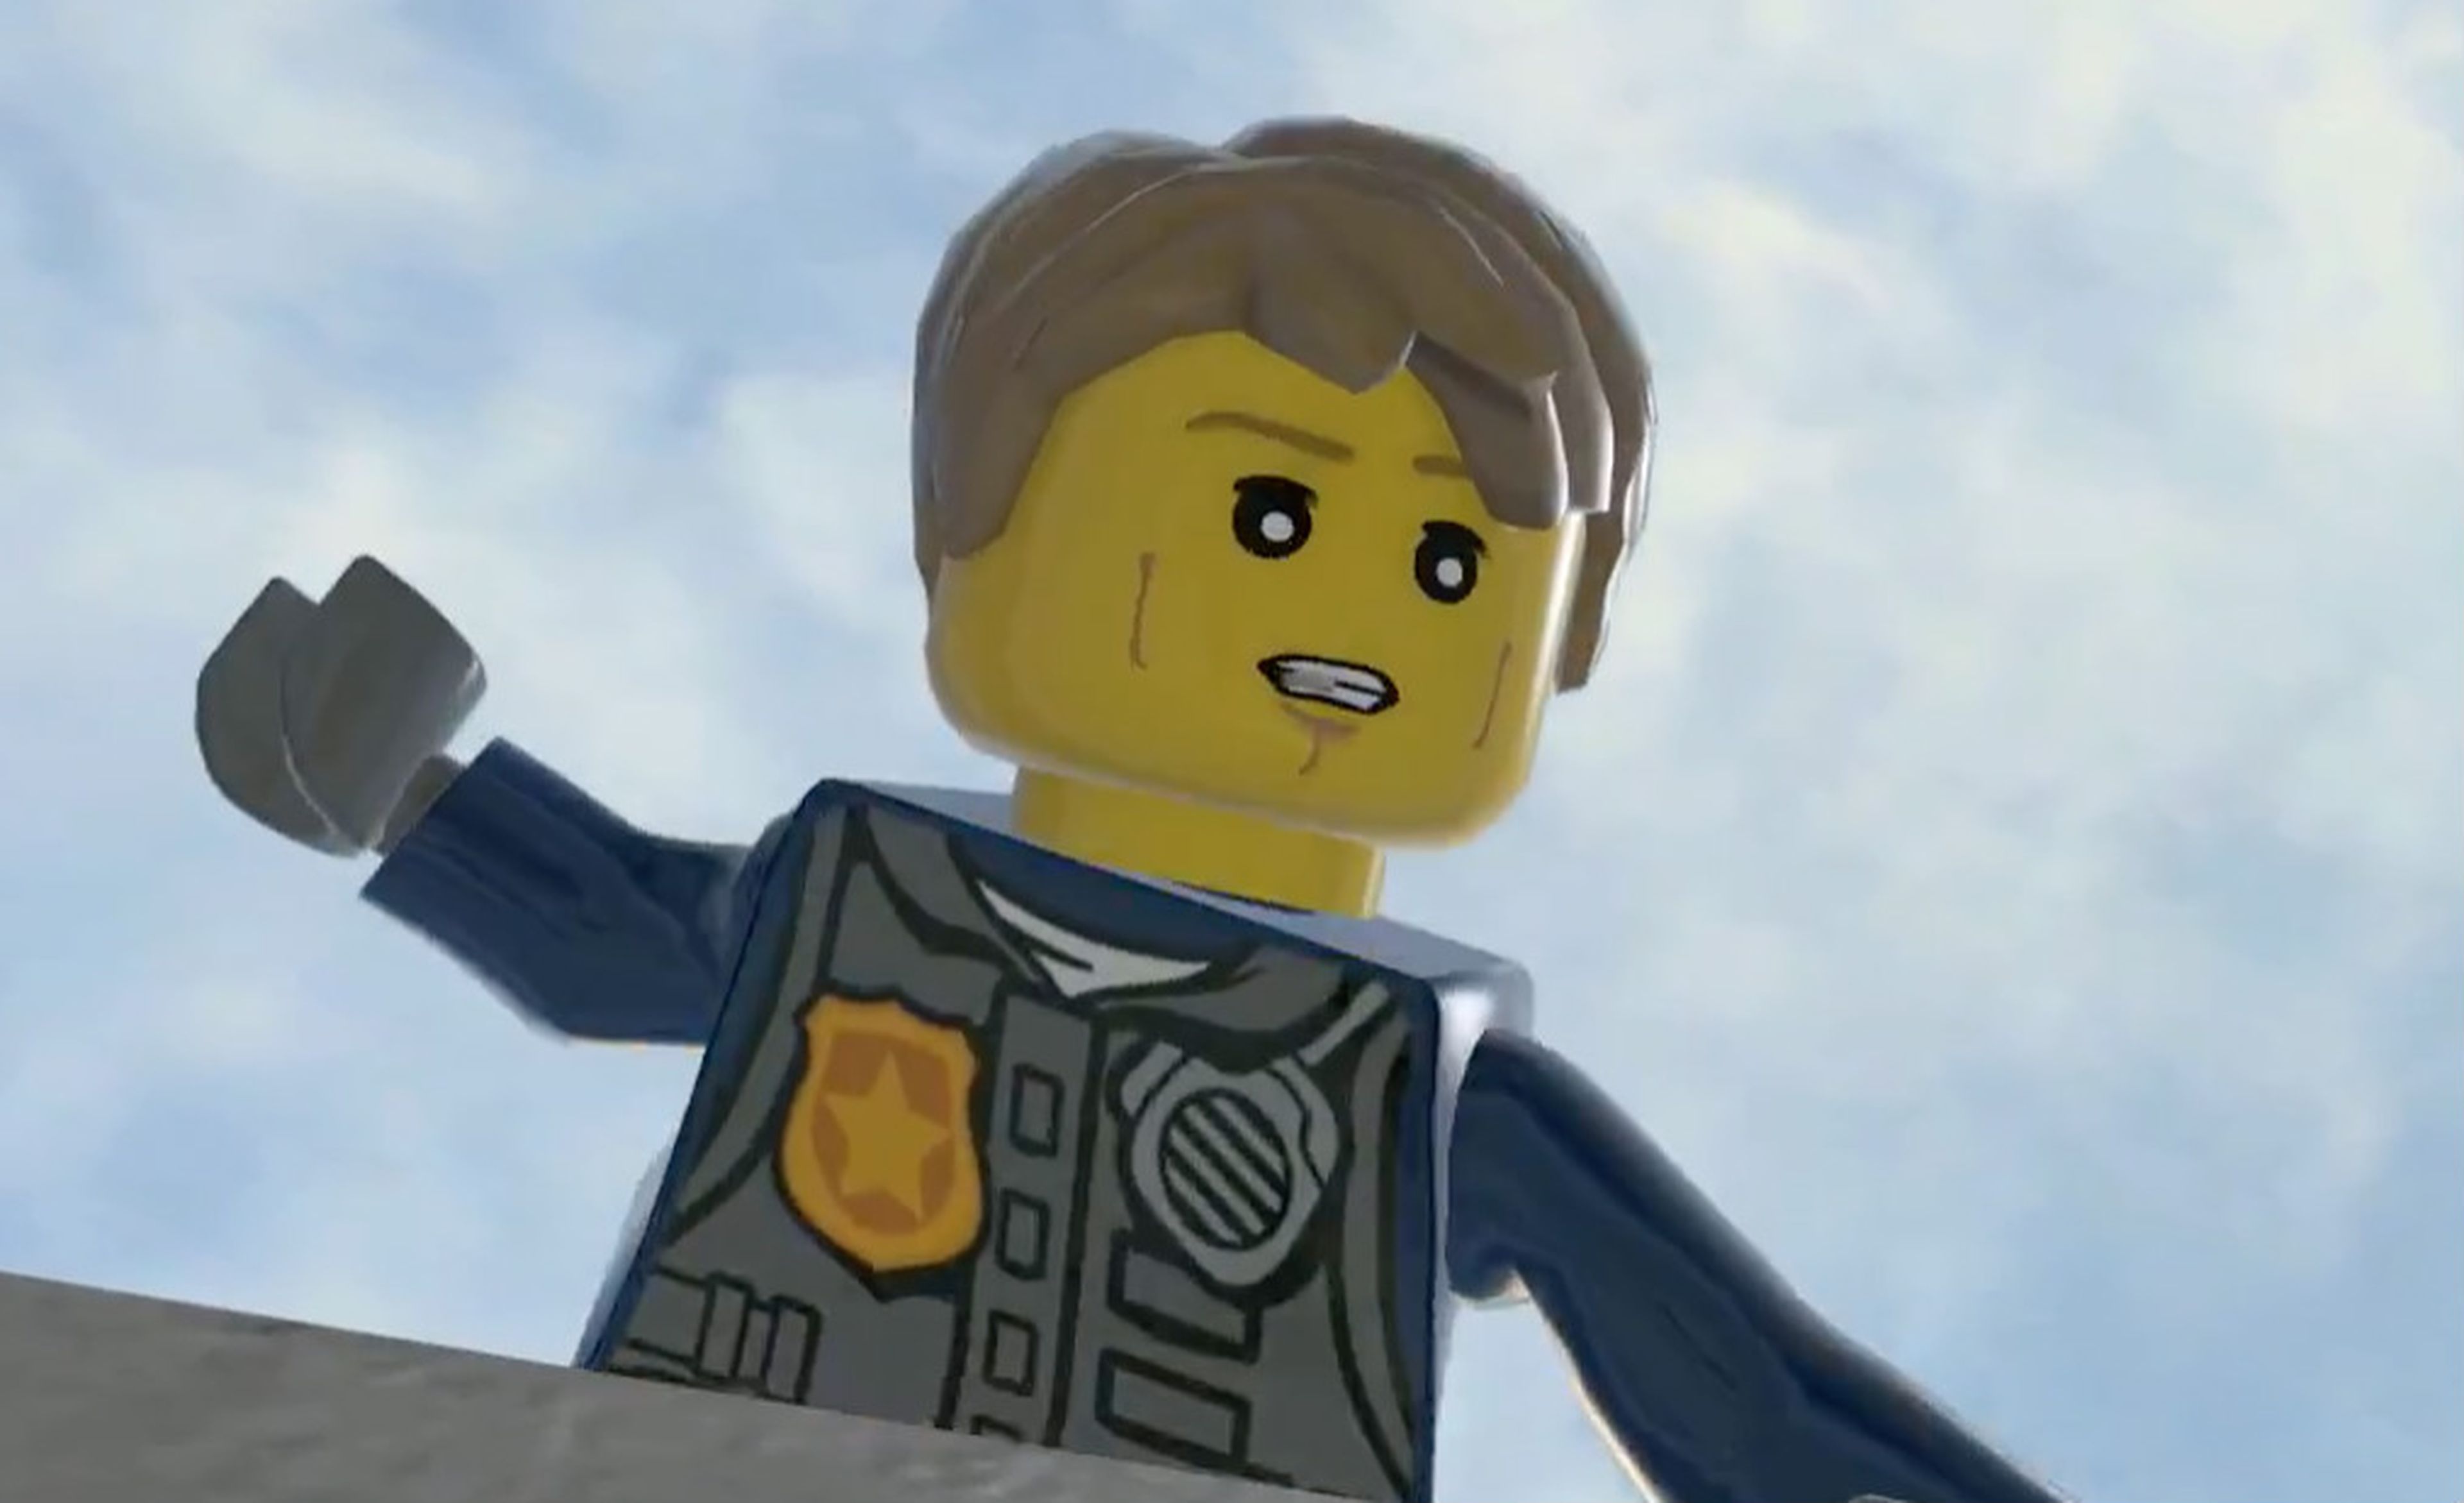 LEGO City Undercover - Trailer para PS4, Nintendo Switch, PC y Xbox One